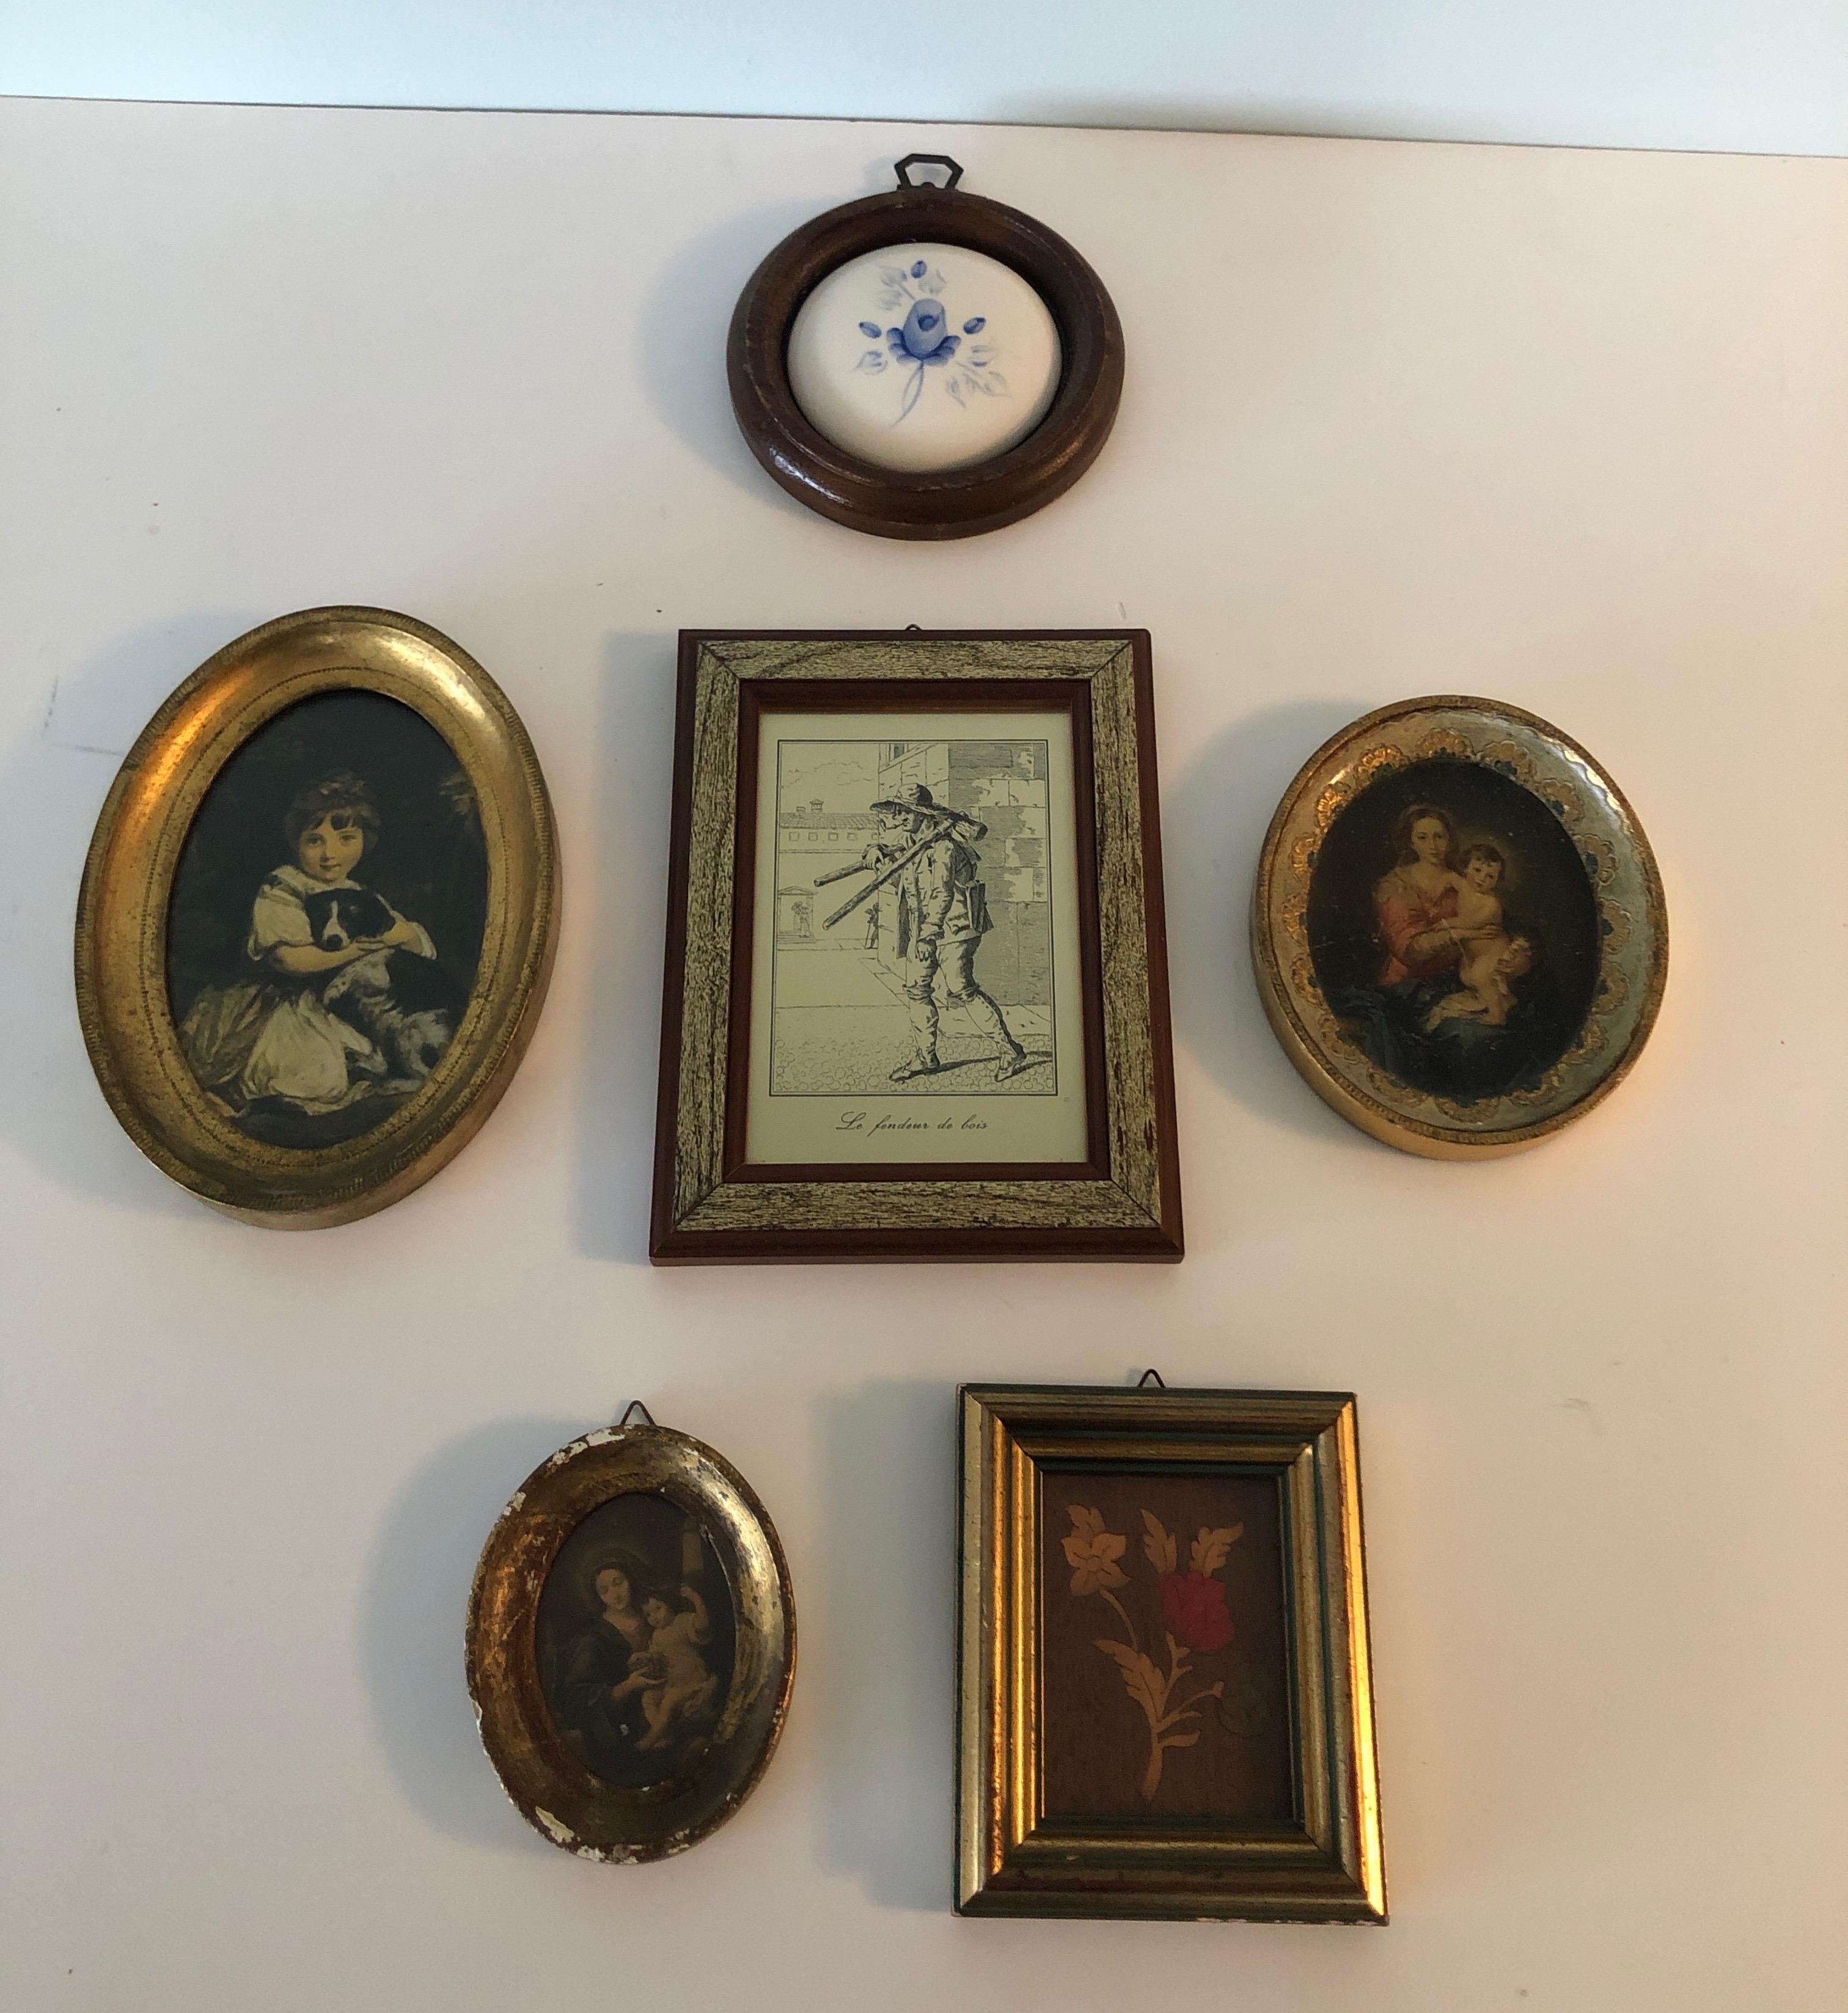 Set of (6) Gallery Wall Framed Miniature Portraits.
#1
Vintage Porcelain Hand Painted Tile Framed in a Circle of Wood
Hand painted in blue
Stamped in the back: Hand Painted Made in the USA.
Hook in the back
Size: 5 x 5 x 1
#2
Petite Oval